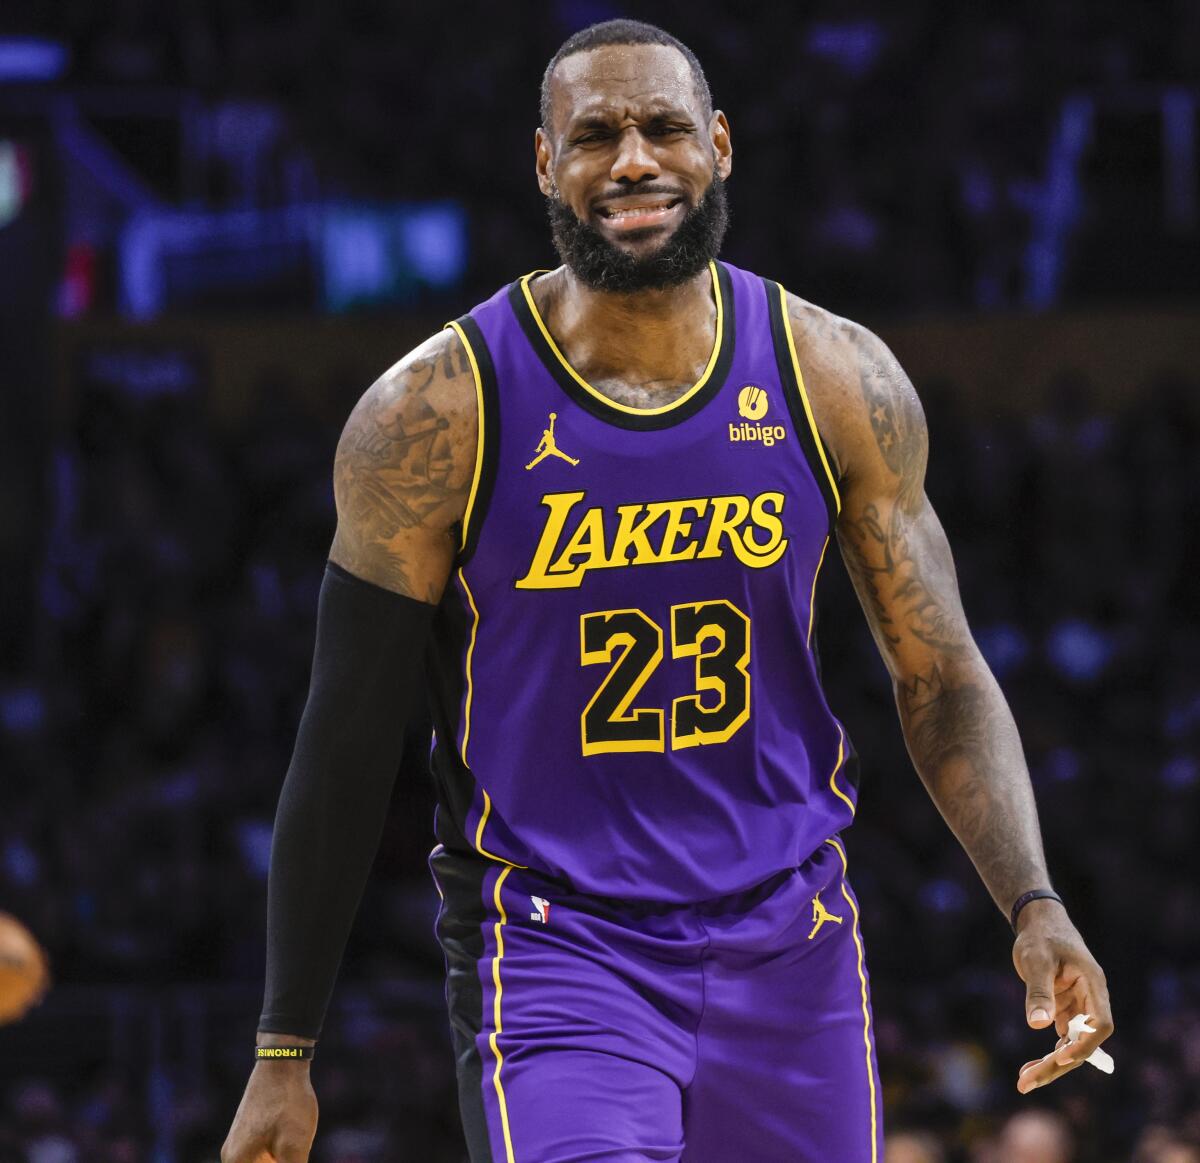 Lakers forward LeBron James expresses his displeasure with a referee's call during Thursday's game against the Suns.